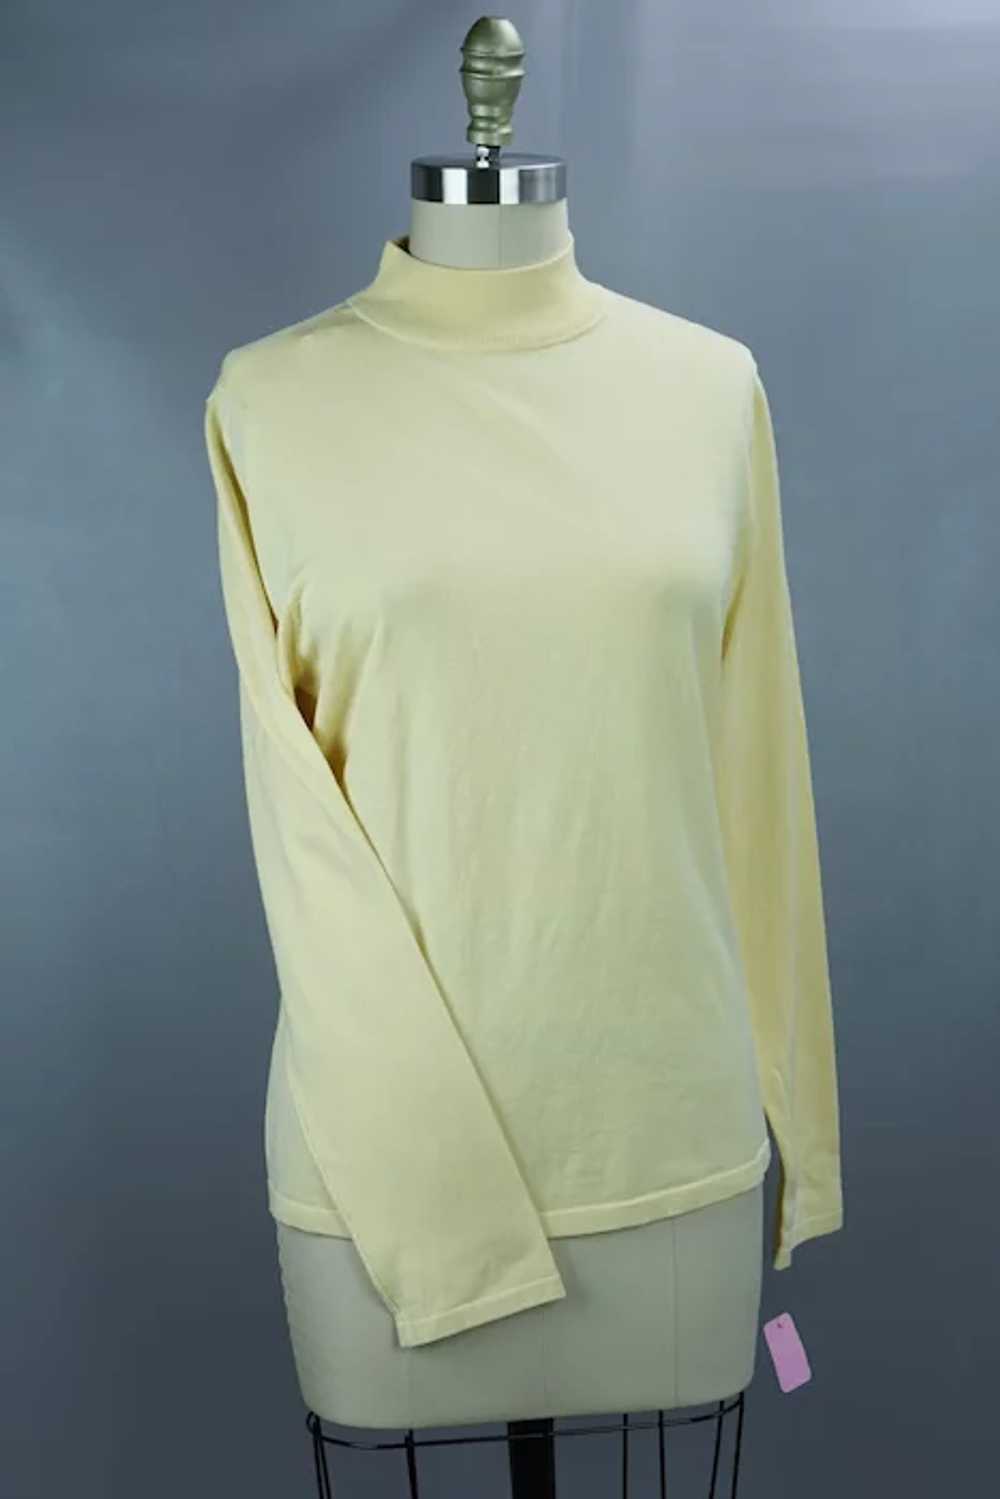 90s Pale Yellow Silk Turtleneck Sweater, Deadstoc… - image 2